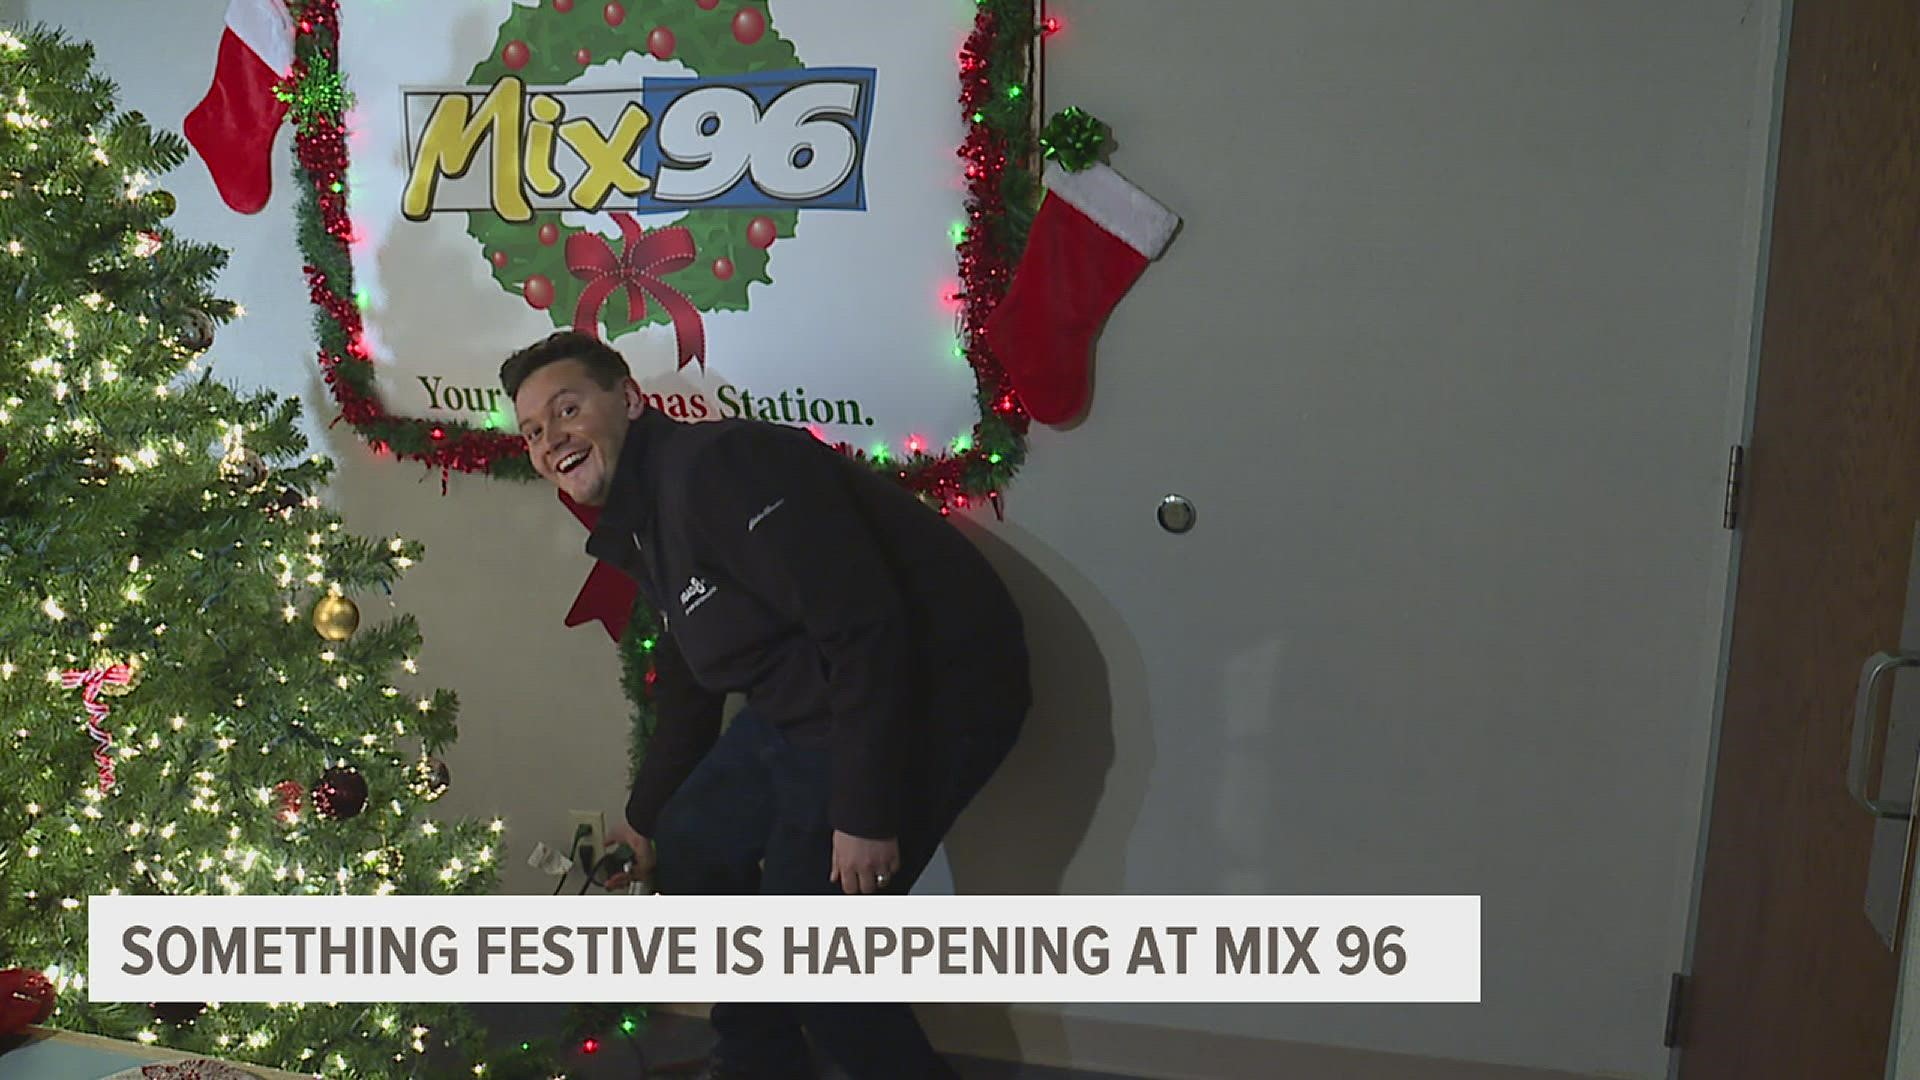 GMQC's very own David Bohlman lit up the Christmas Tree at 96.1 Mix to officially kick off the holiday season!